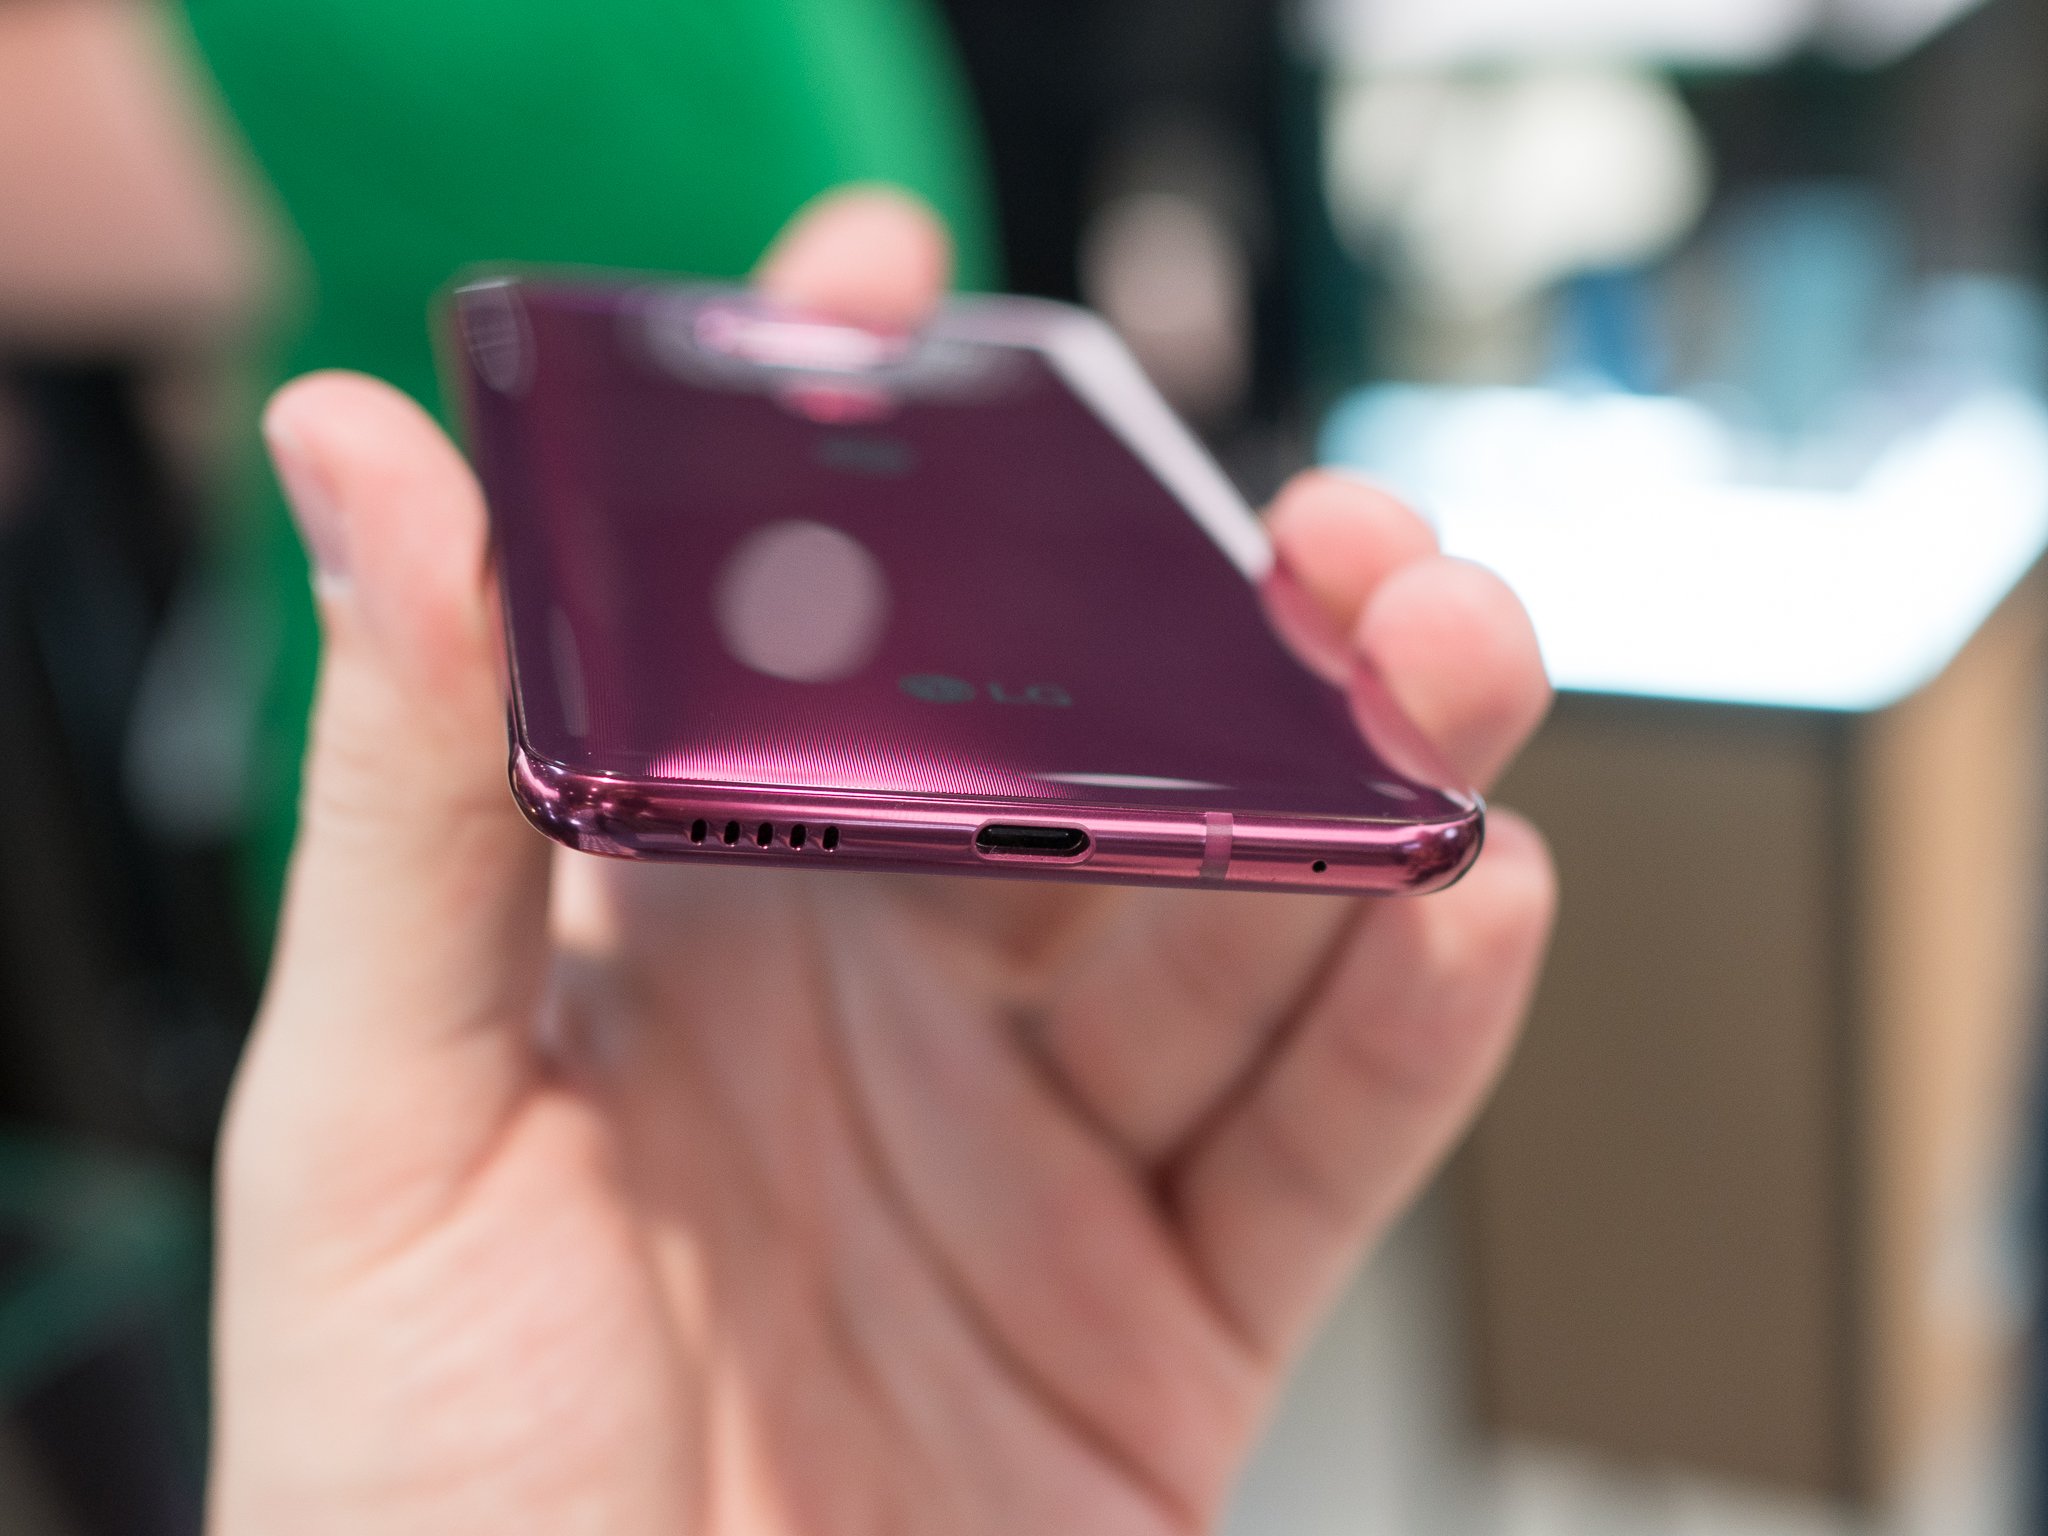 Yup The Lg V30 Is Beautiful In Its New Raspberry Rose Color